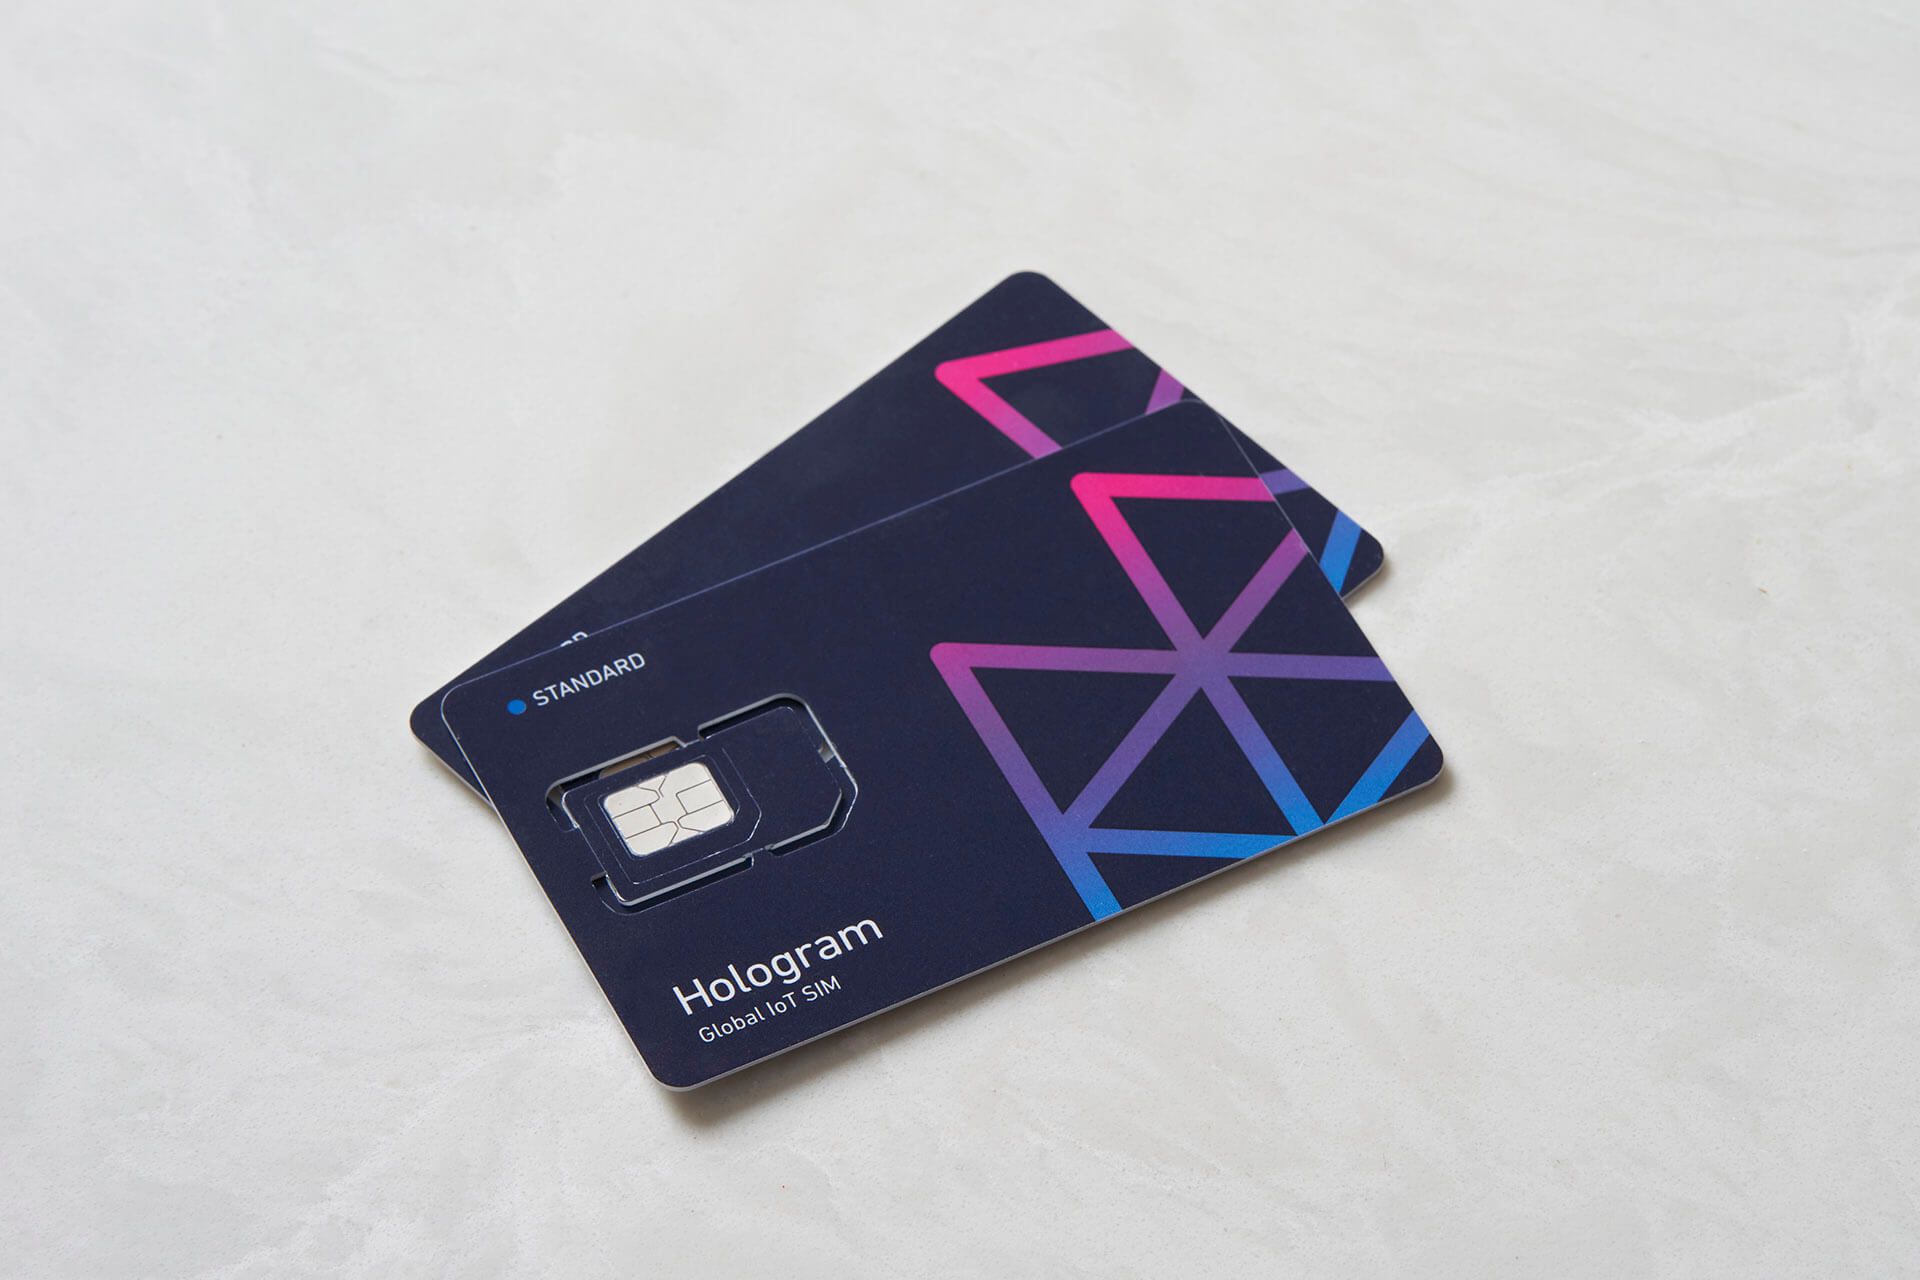 Two Hologram sim cards on a marble countertop